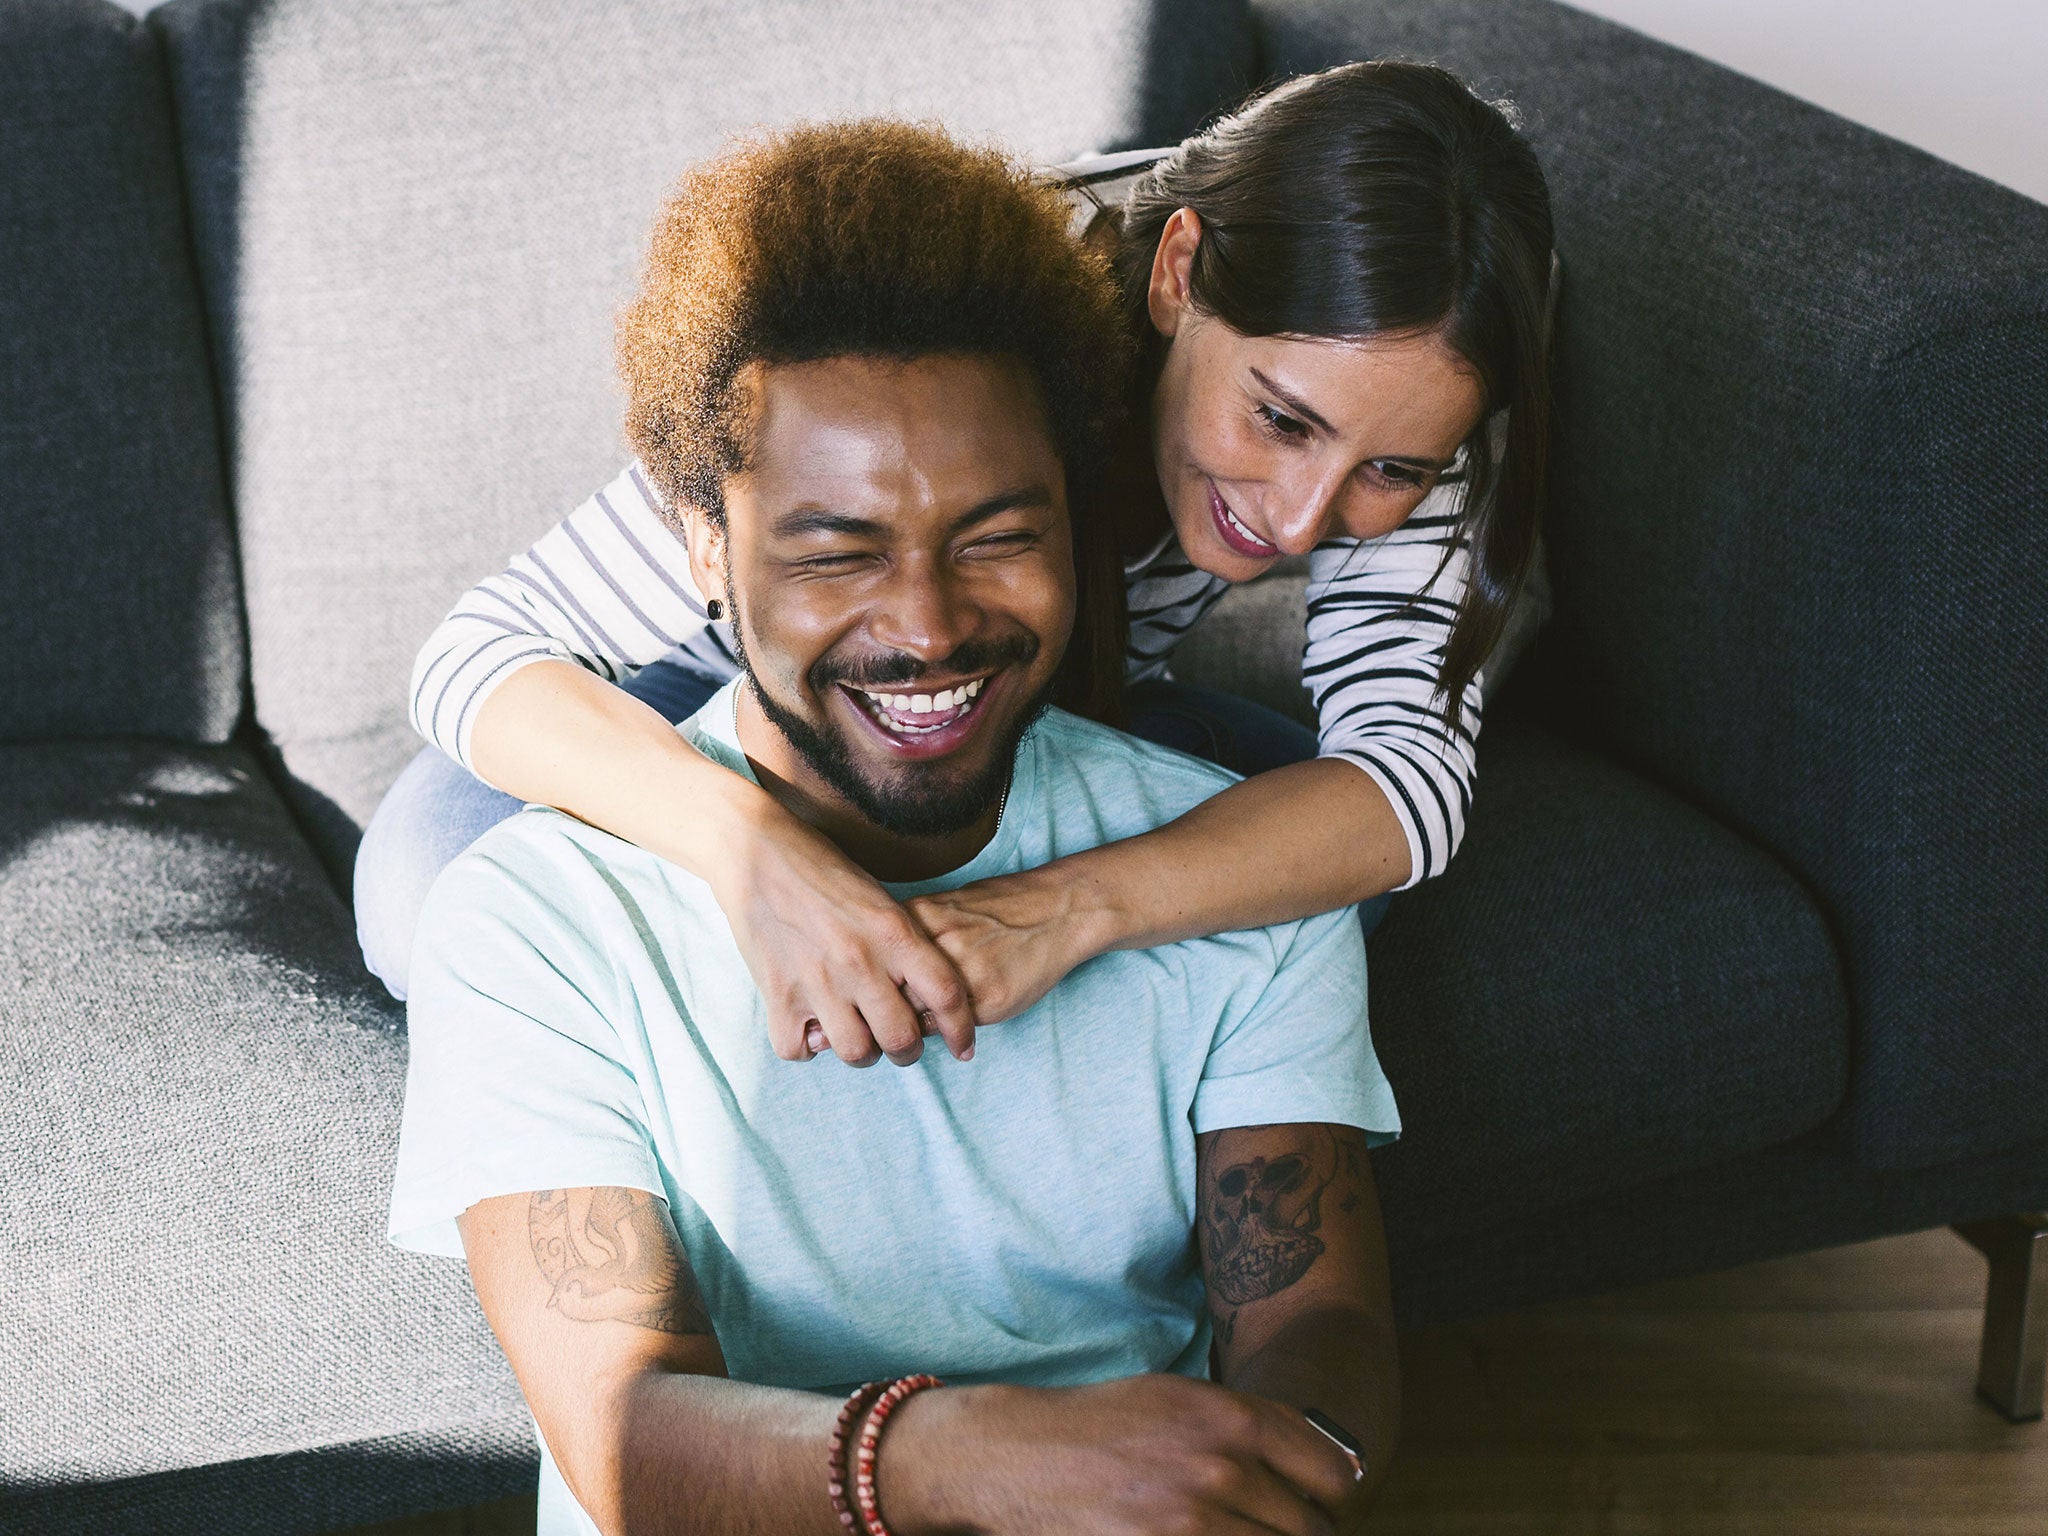 Laugh At The Same Time As Your Partner To Feel Better About Your